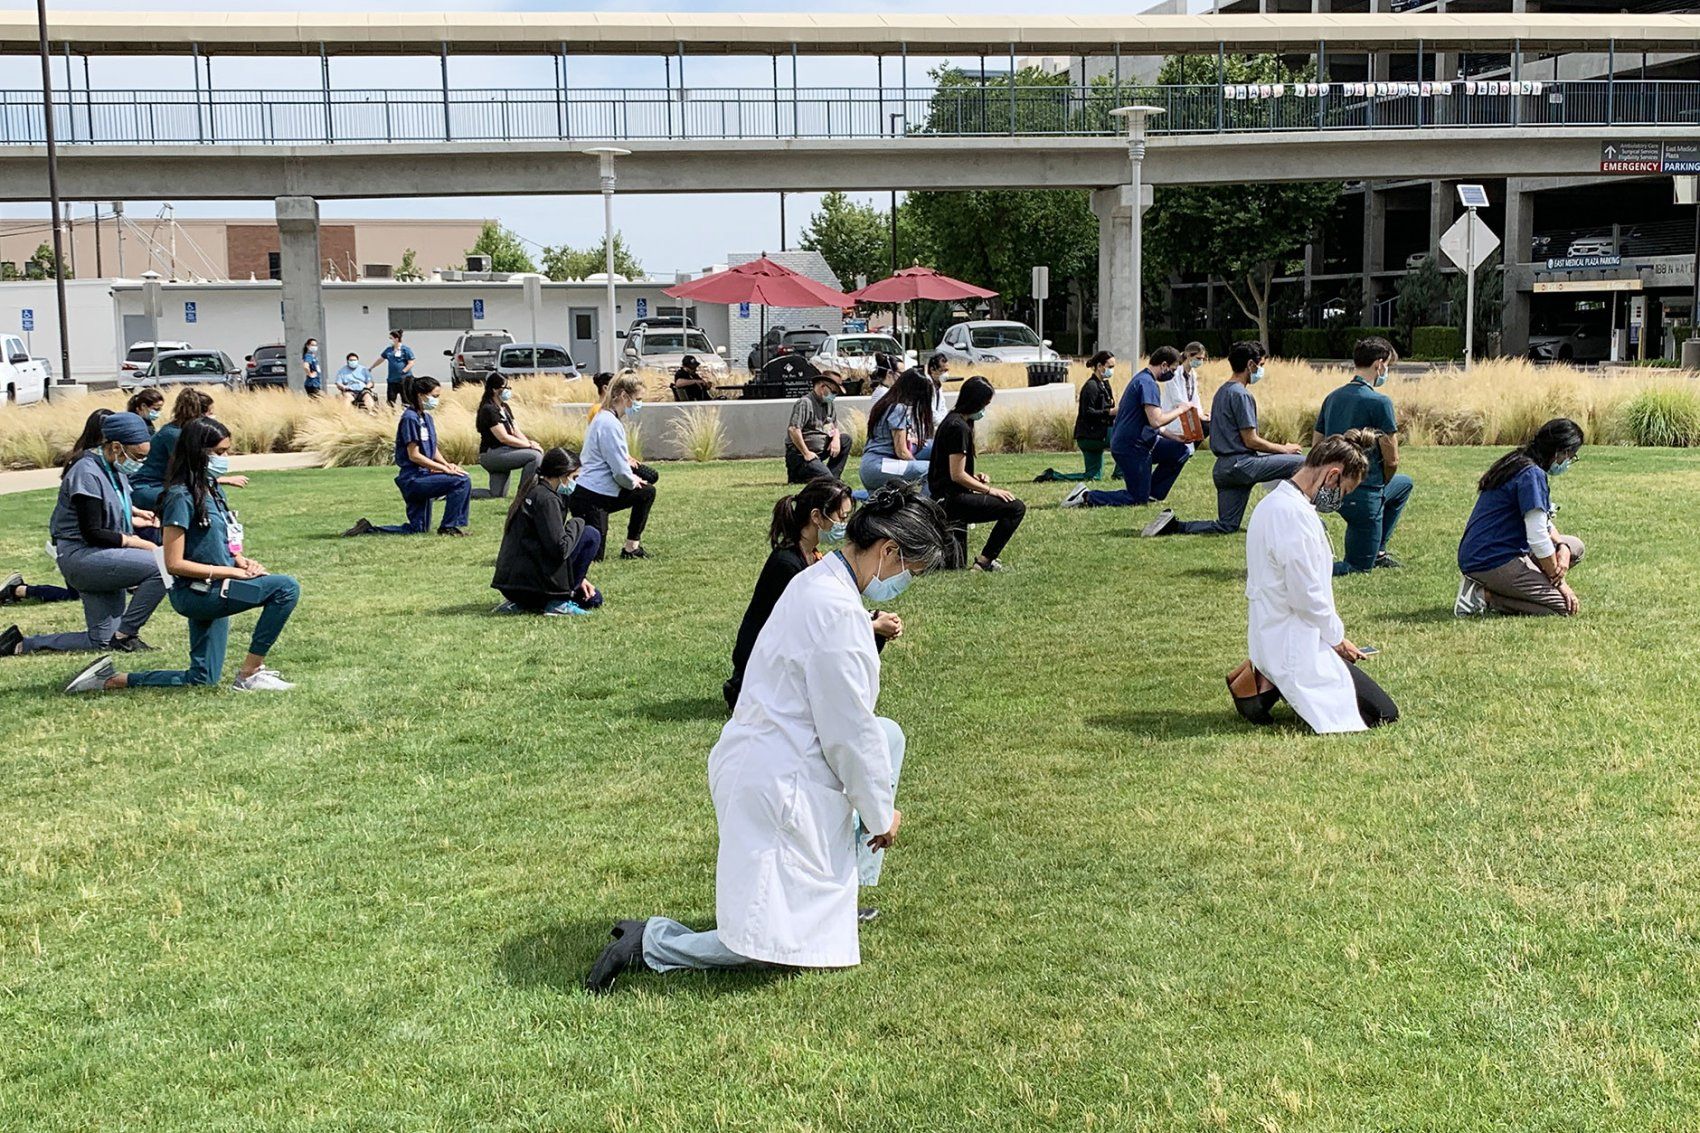 protestors kneel on a lawn at UCSF Fresno